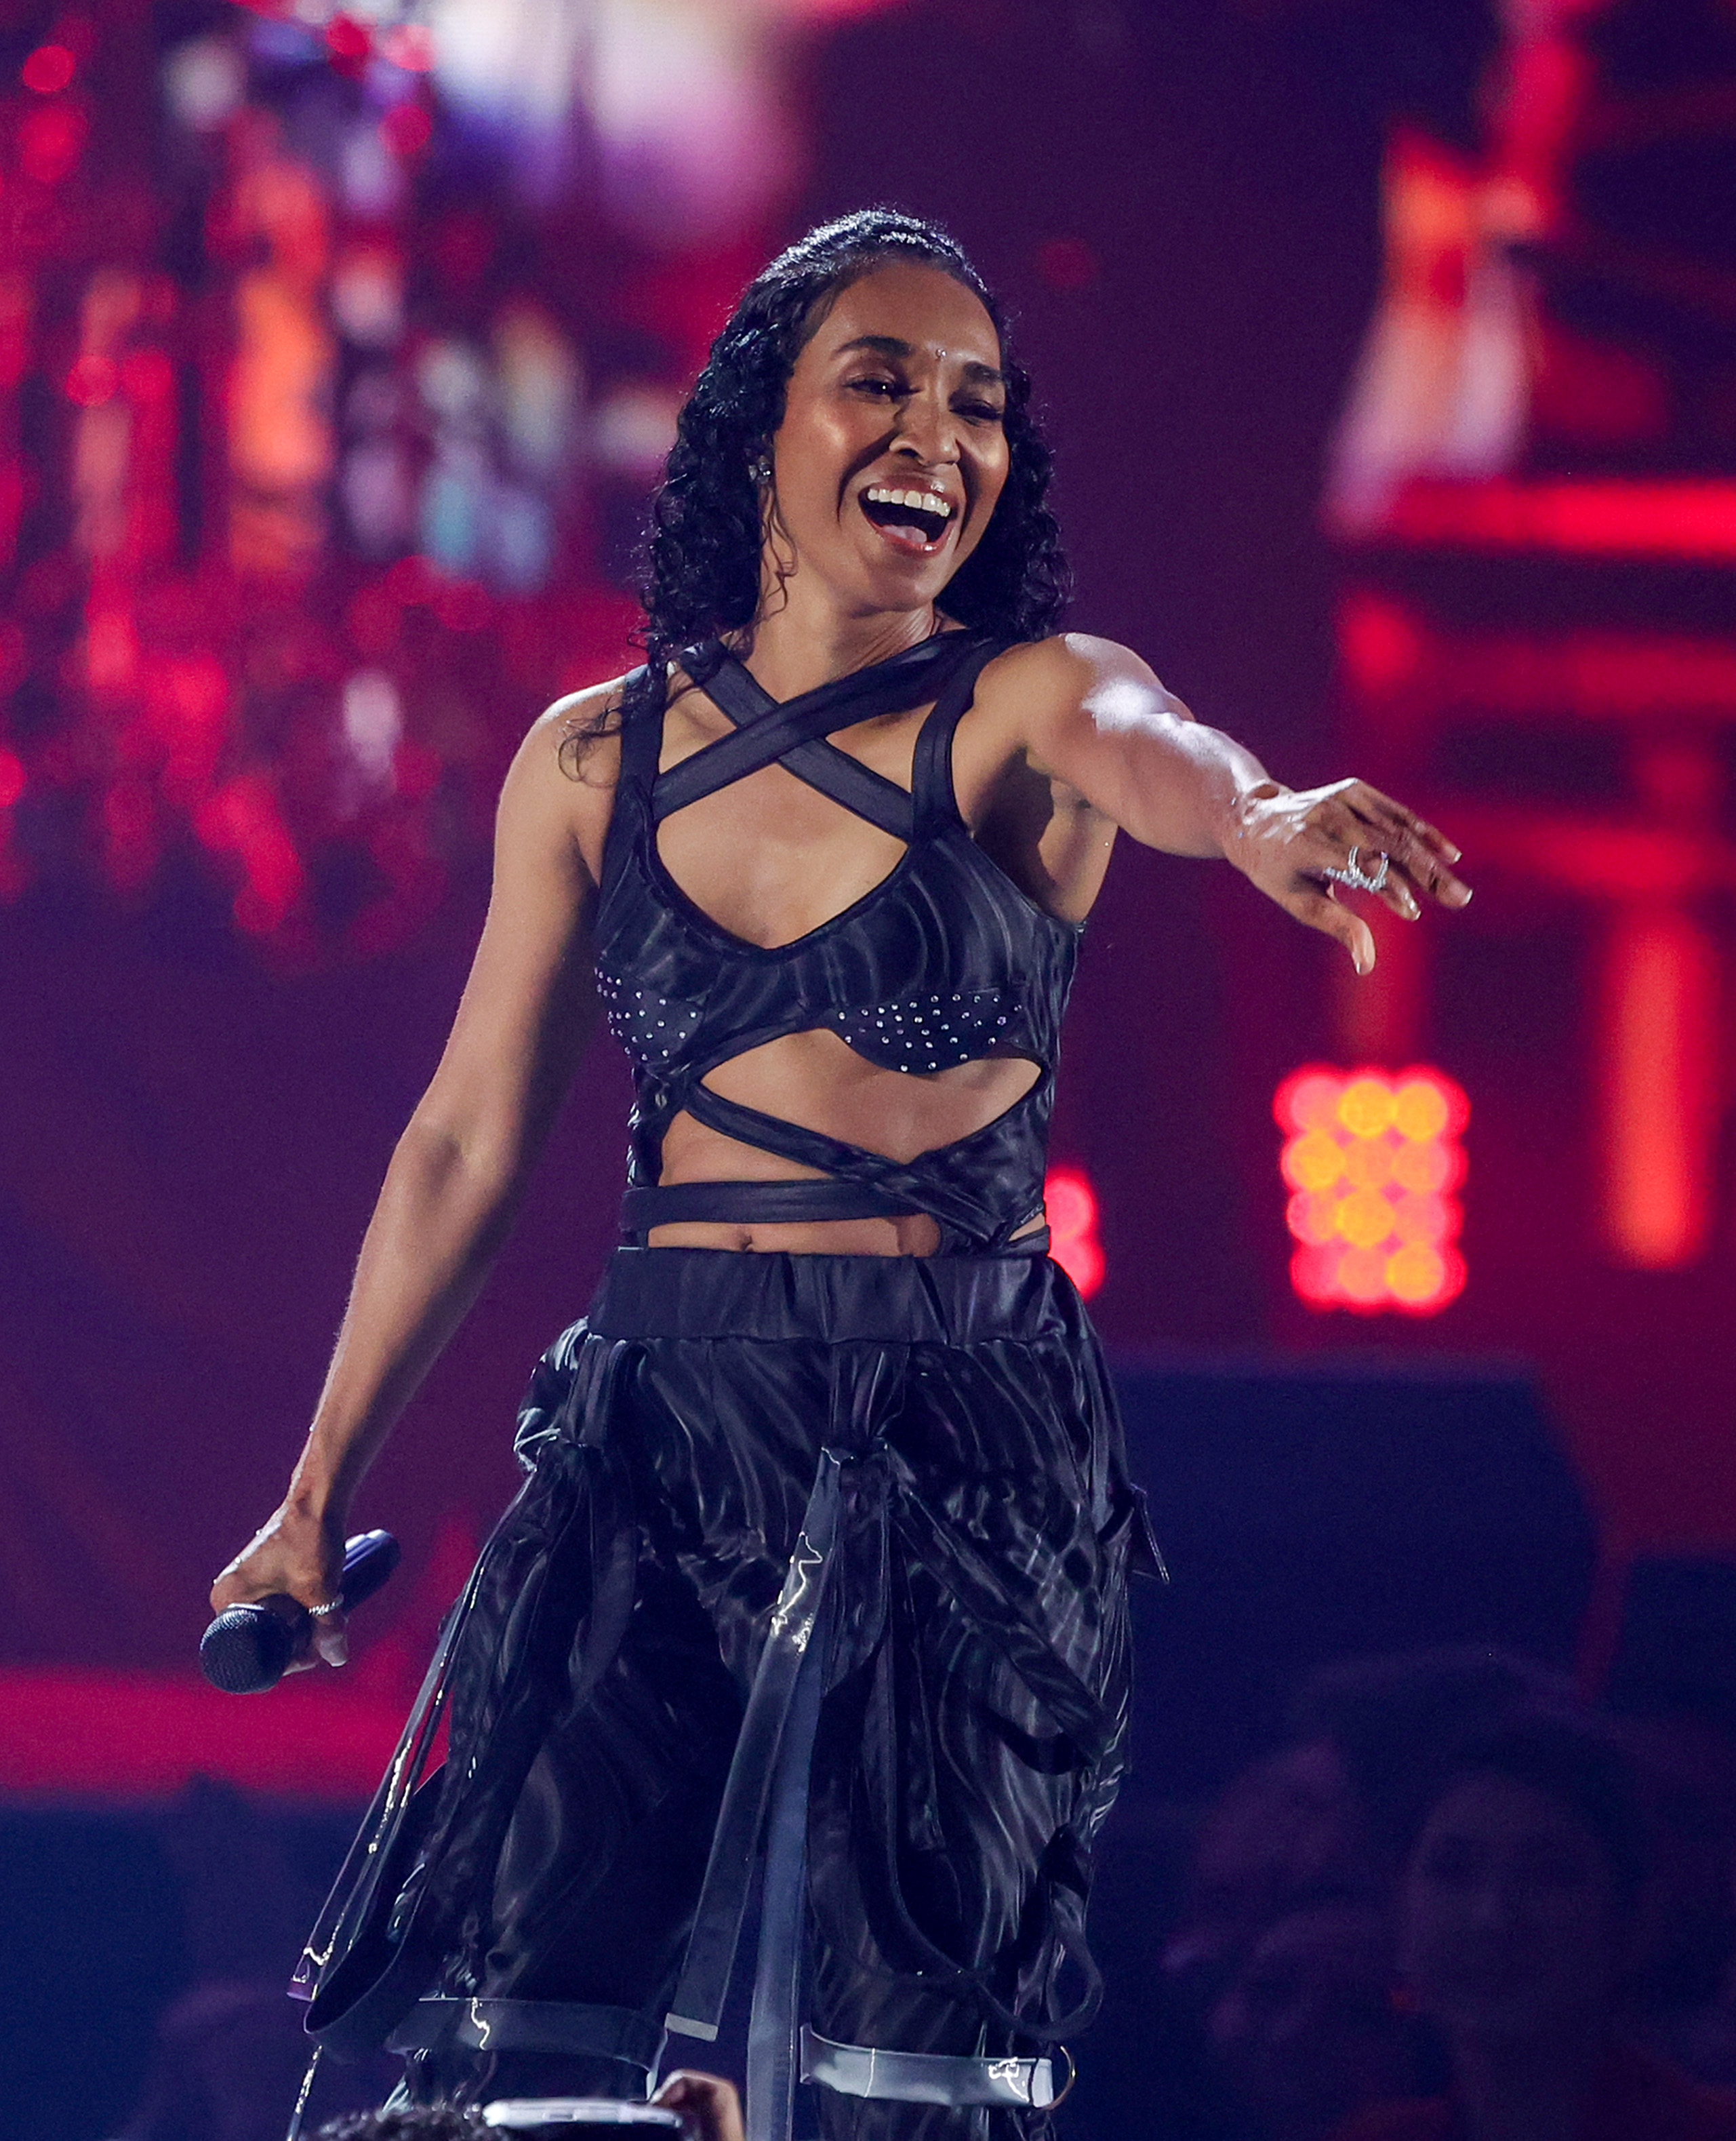 Rozonda "Chilli" Thomas from the girl group TLC performing at the 2023 iHeartRadio Music Festival in Las Vegas, Nevada, on September 22, 2023 | Source: Getty Images